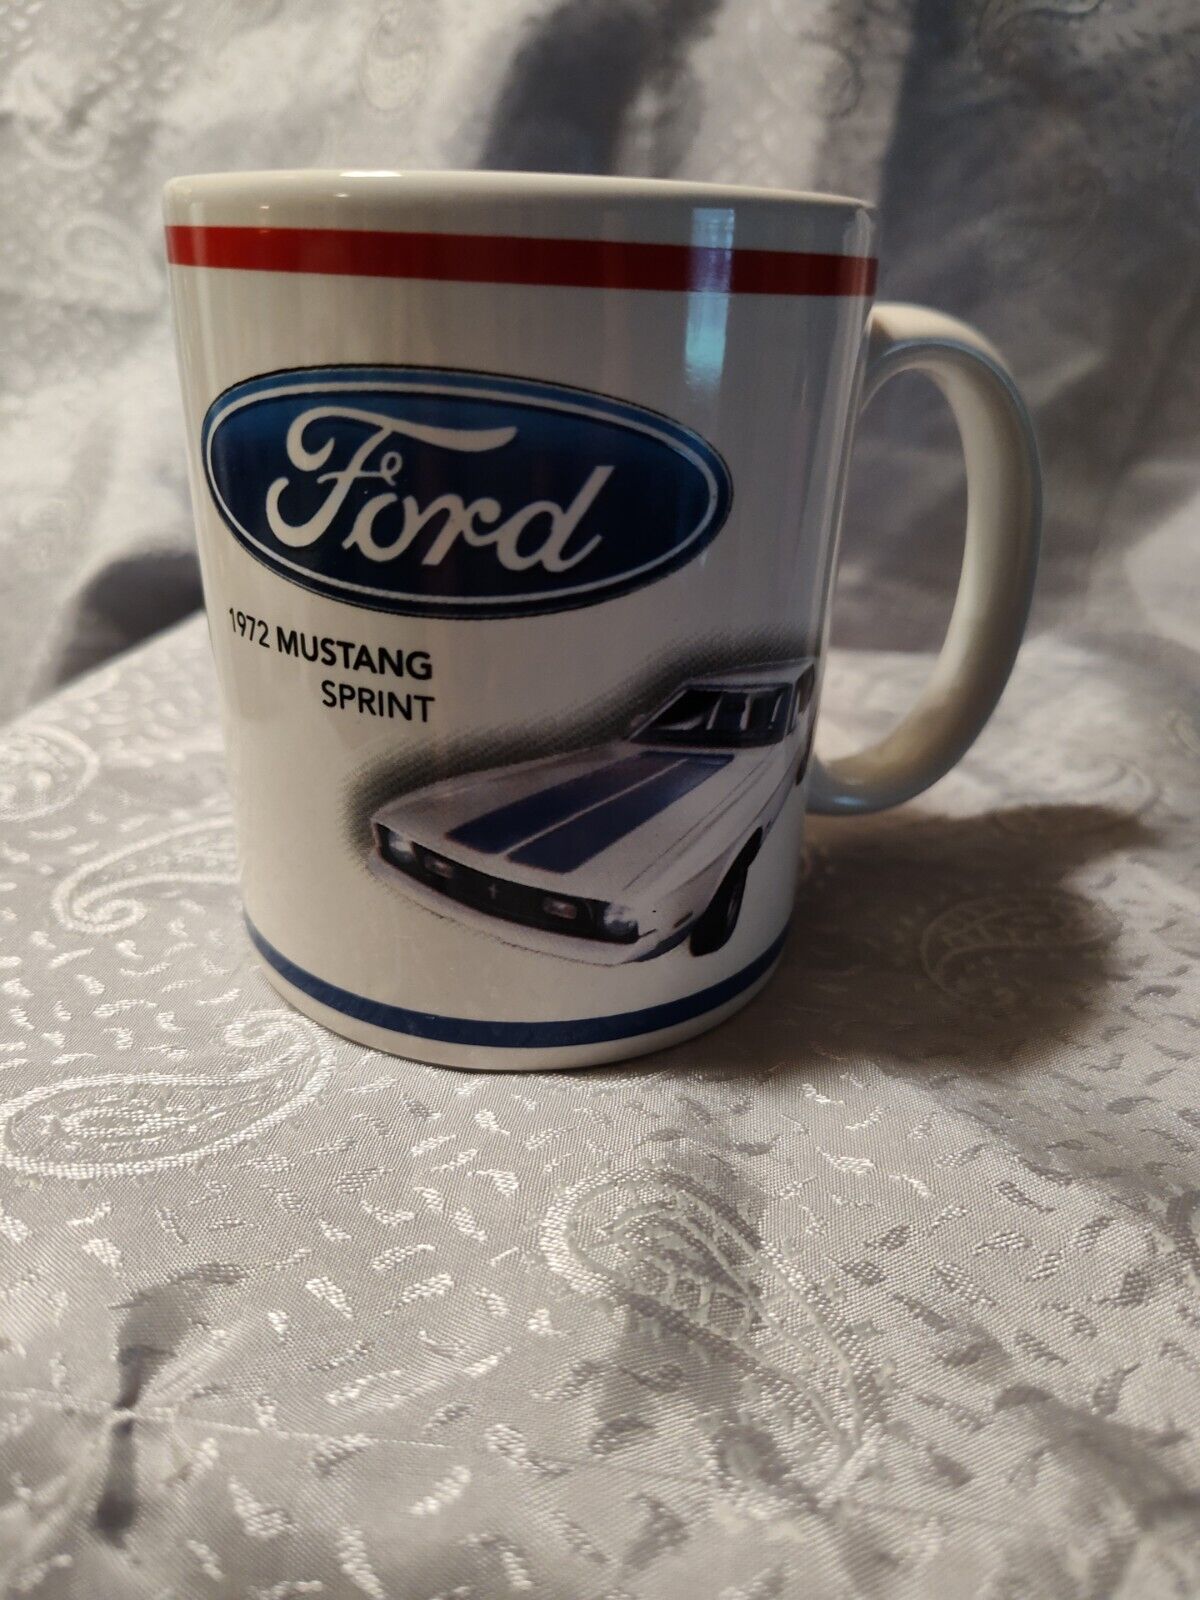  1972 FORD MUSTANG  SPRINT COFFEE MUG   OFFICIALLY LICENSED Ford Motor Co